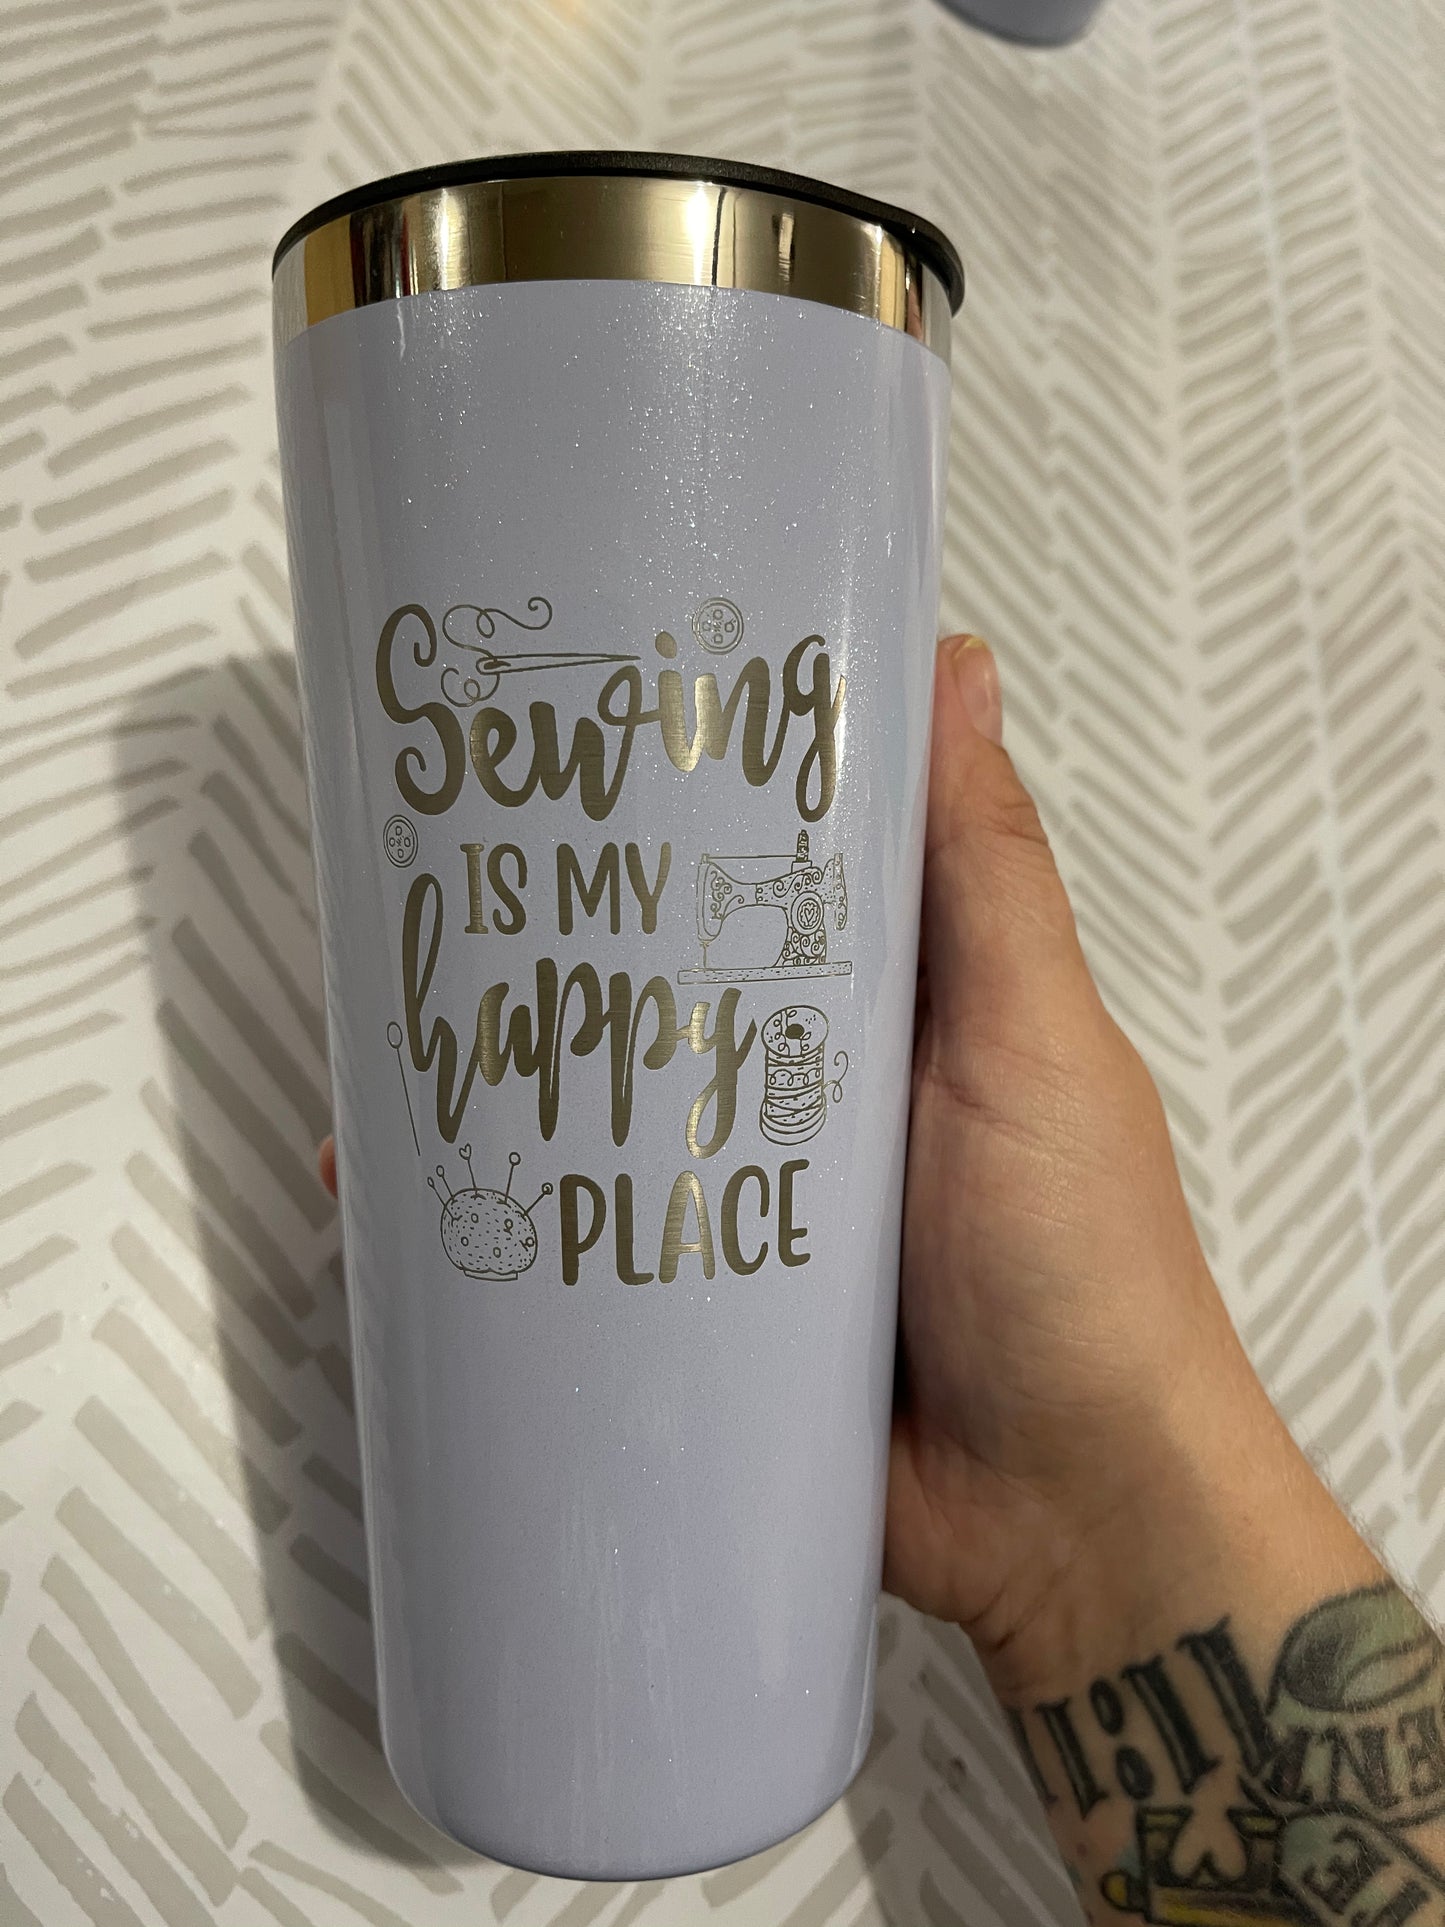 22oz steel insulated tumbler - Engraved - You are Sew Cool Peach